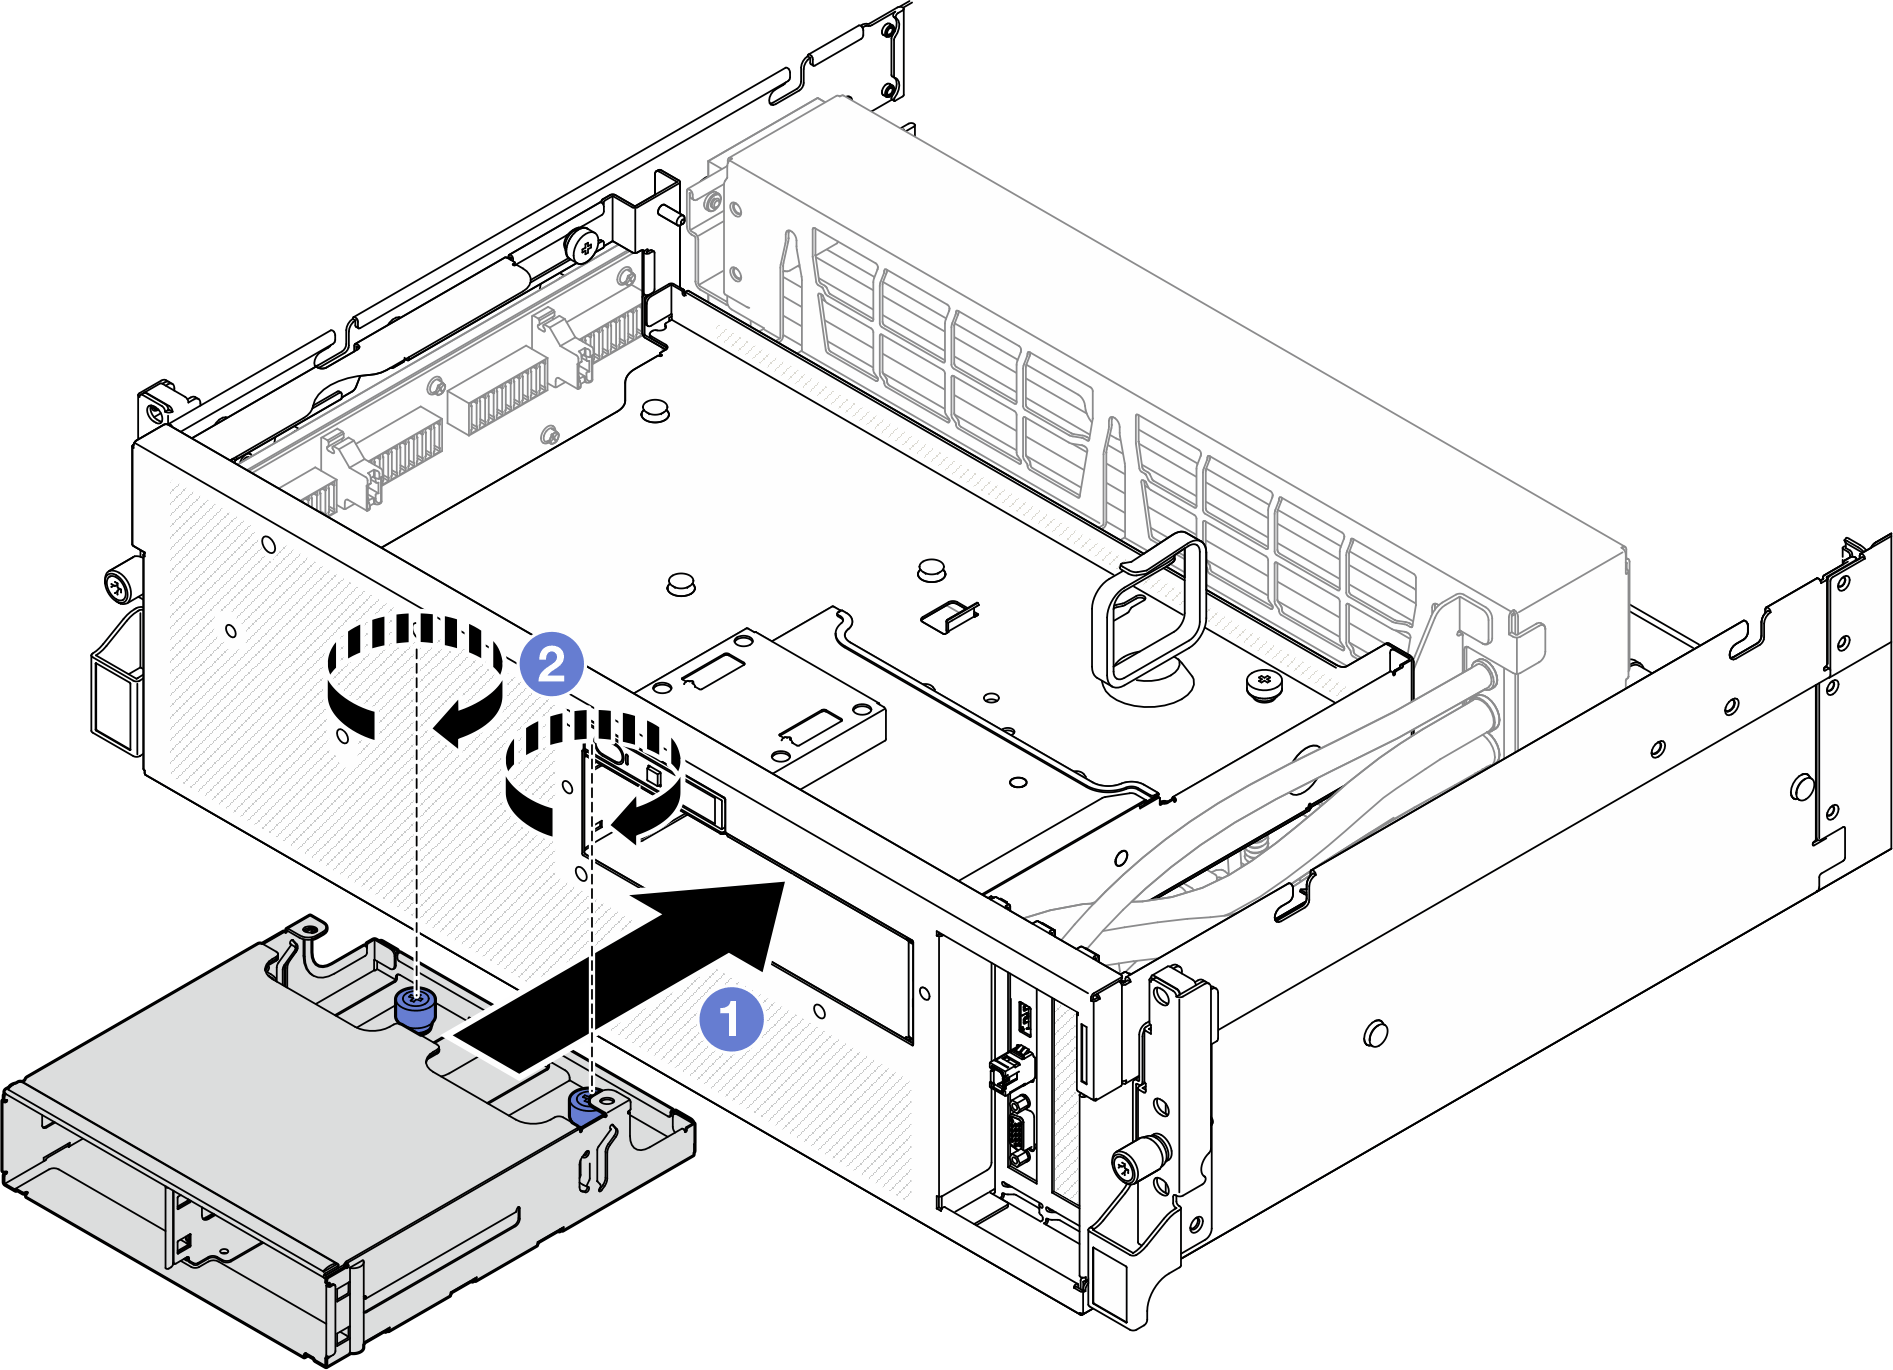 2.5-inch drive cage installation